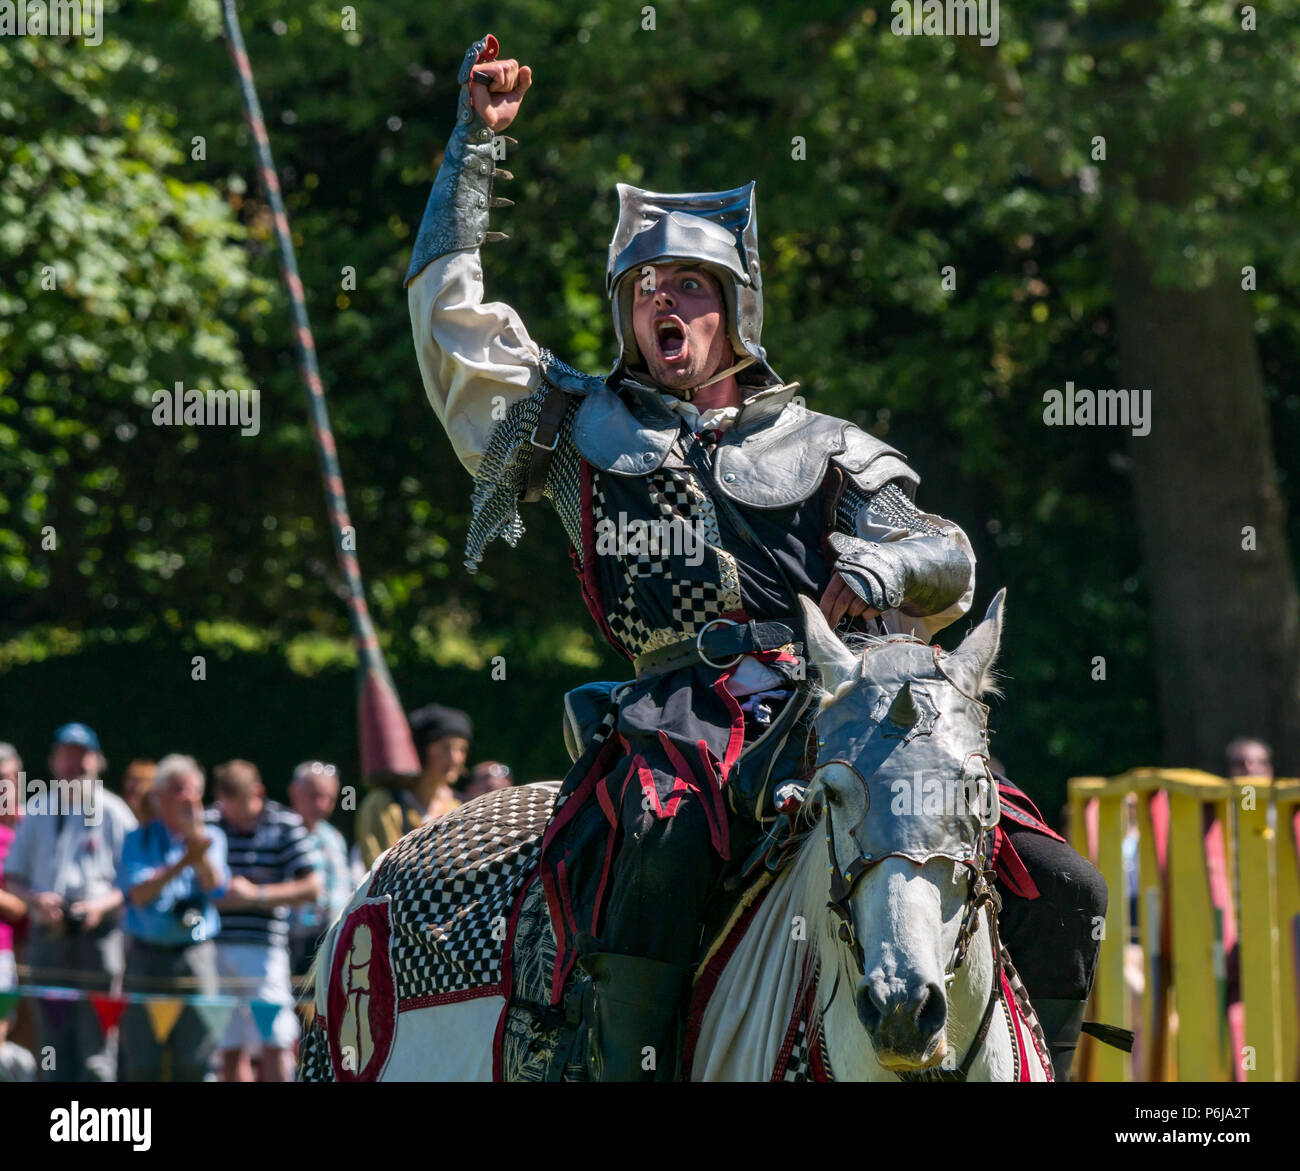 Jousting and Medieval Fair at Linlithgow Palace, Linlithgow, Scotland, United Kingdom, 30th June 2018. Historic Environment Scotland kick off their summer entertainment programme with a fabulous display of Medieval jousting in the grounds of the historic castle. The family fun day includes jousting performed by Les Amis D'Onno equine stunt team. A knight raises his arm and cheers in victory Stock Photo